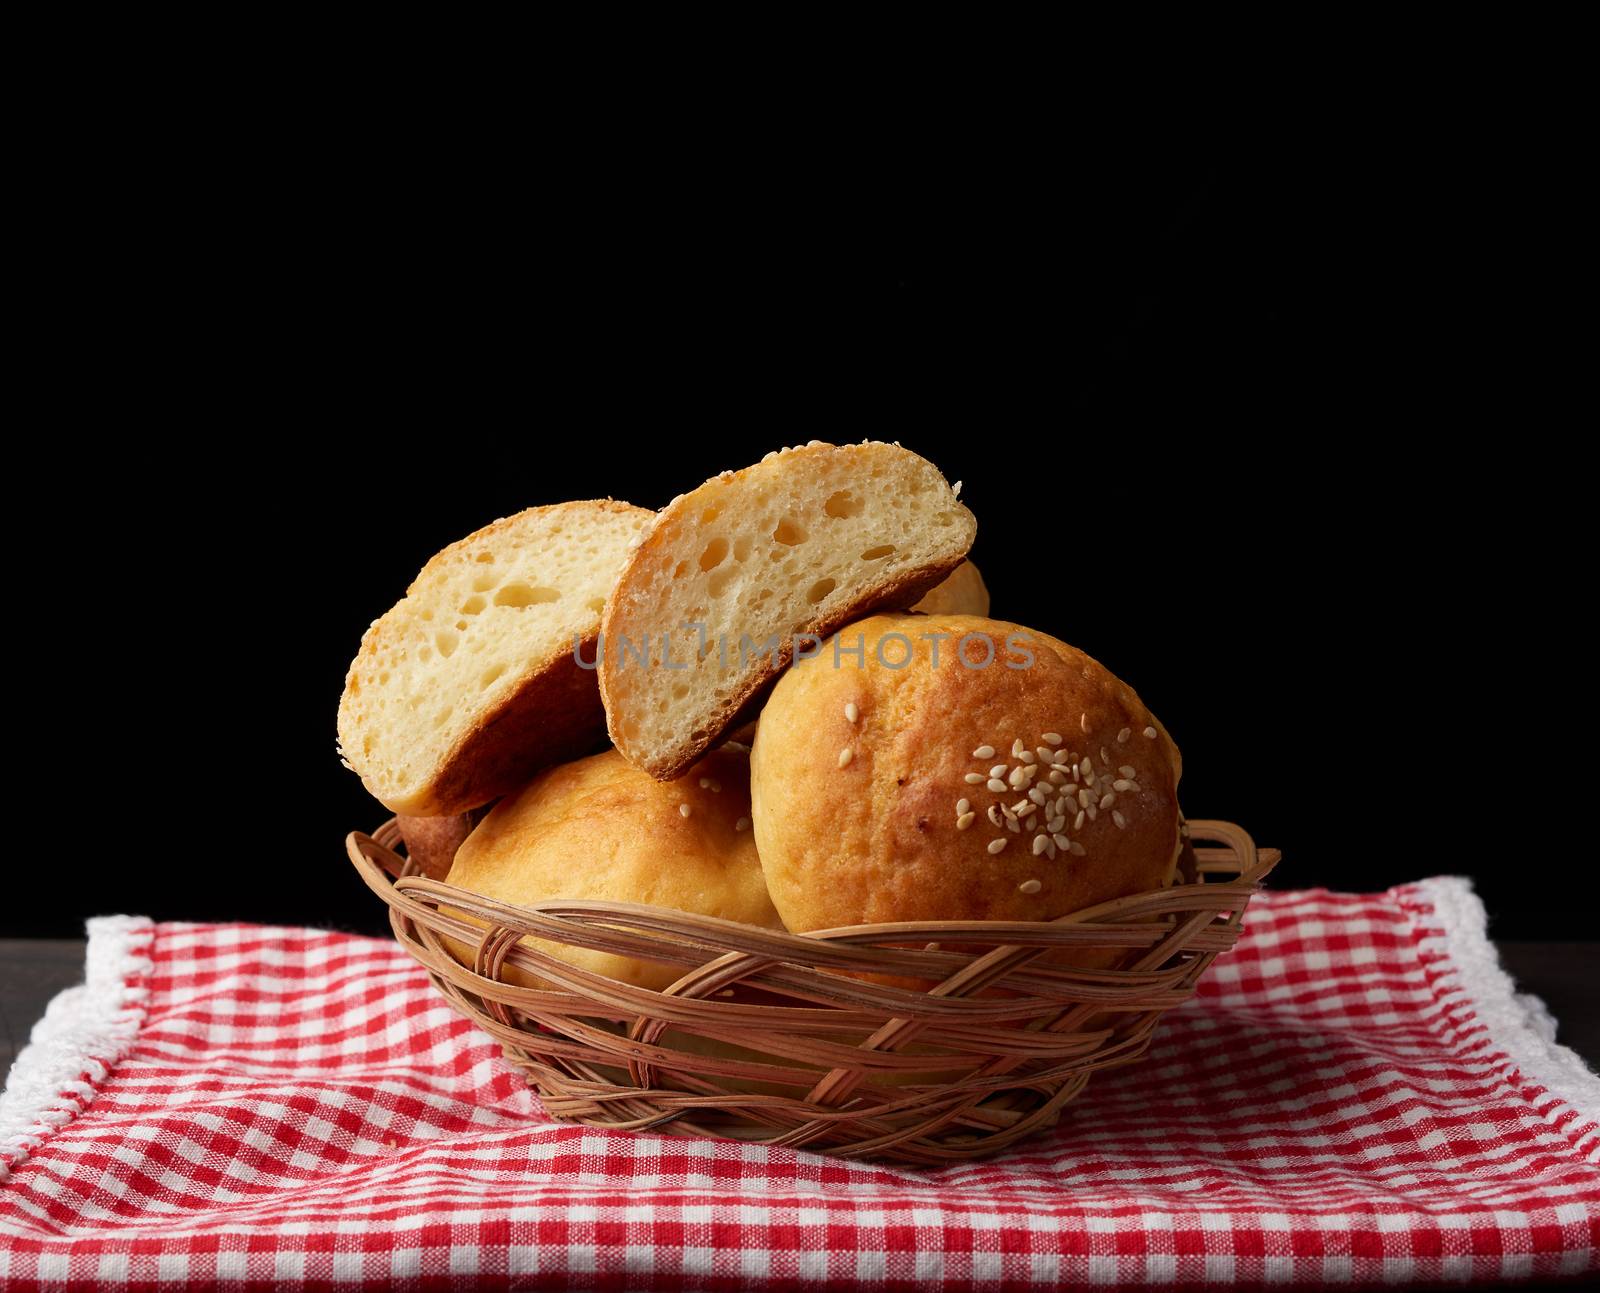 baked round bun with sesame seeds, black background, home baking